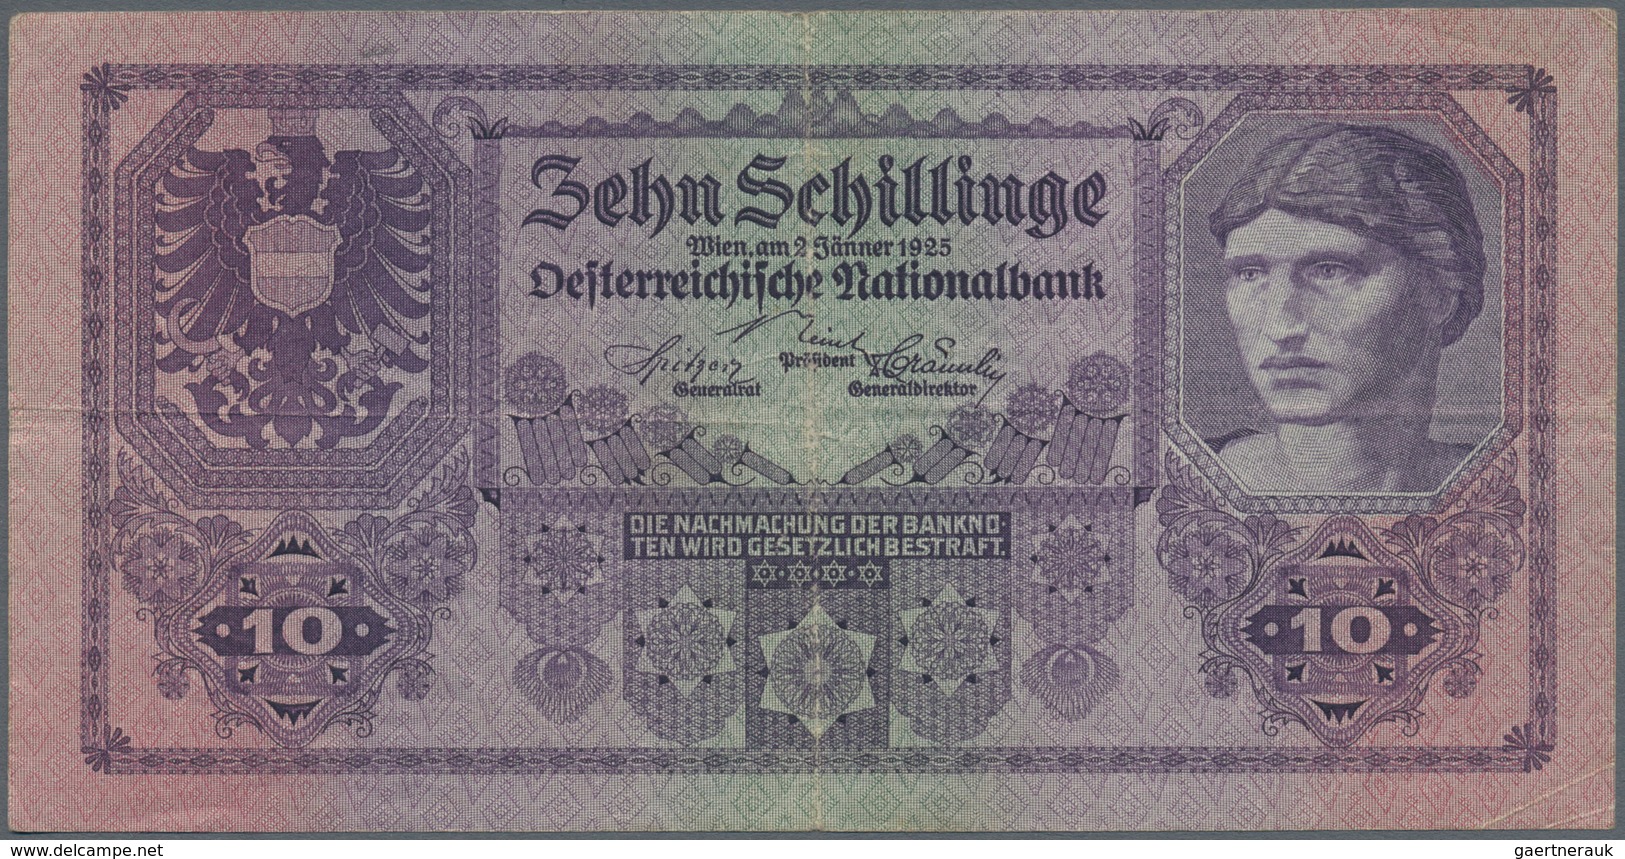 Austria / Österreich: 10 Schilling 1925 P. 89, Stronger Center Fold, Horizontal Fold And Creases In - Oostenrijk